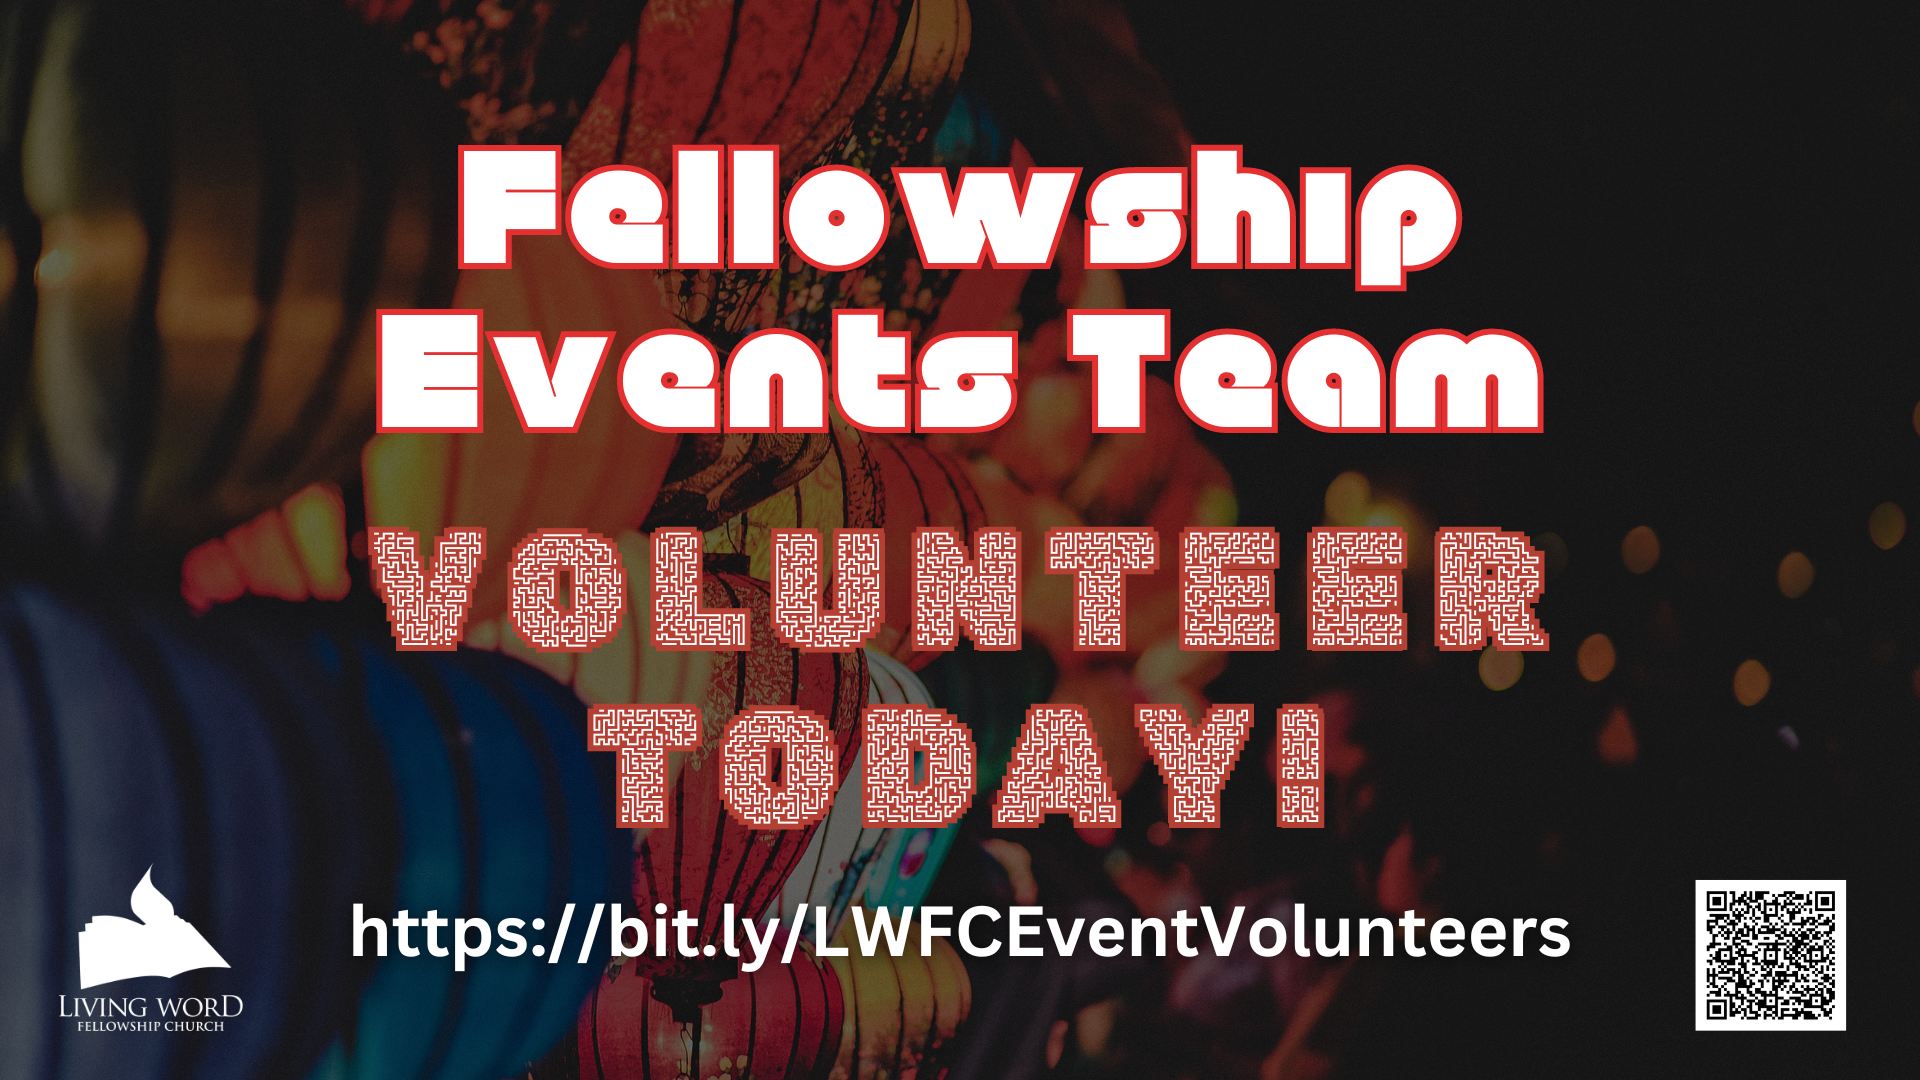 Volunteer With The Fellowship Events Team head image